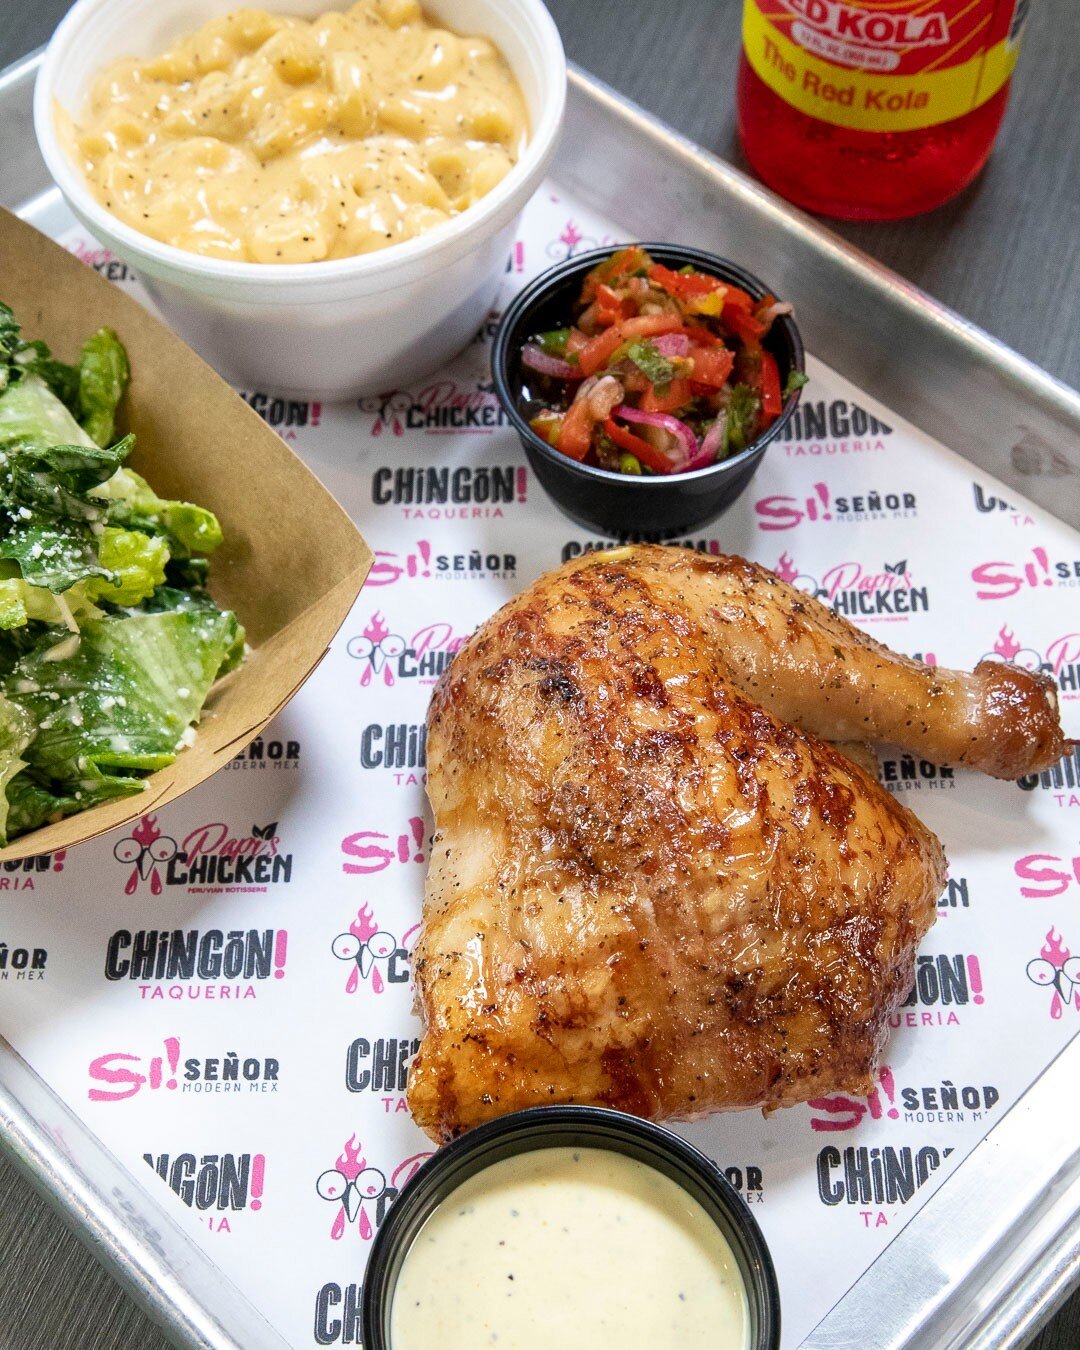 Forget that boring dinner 😴 and come have a real one at Papi&rsquo;s!

#papischicken #rotisseriechicken #polloalabrasa #chicken #peruvianfood #lelandnc